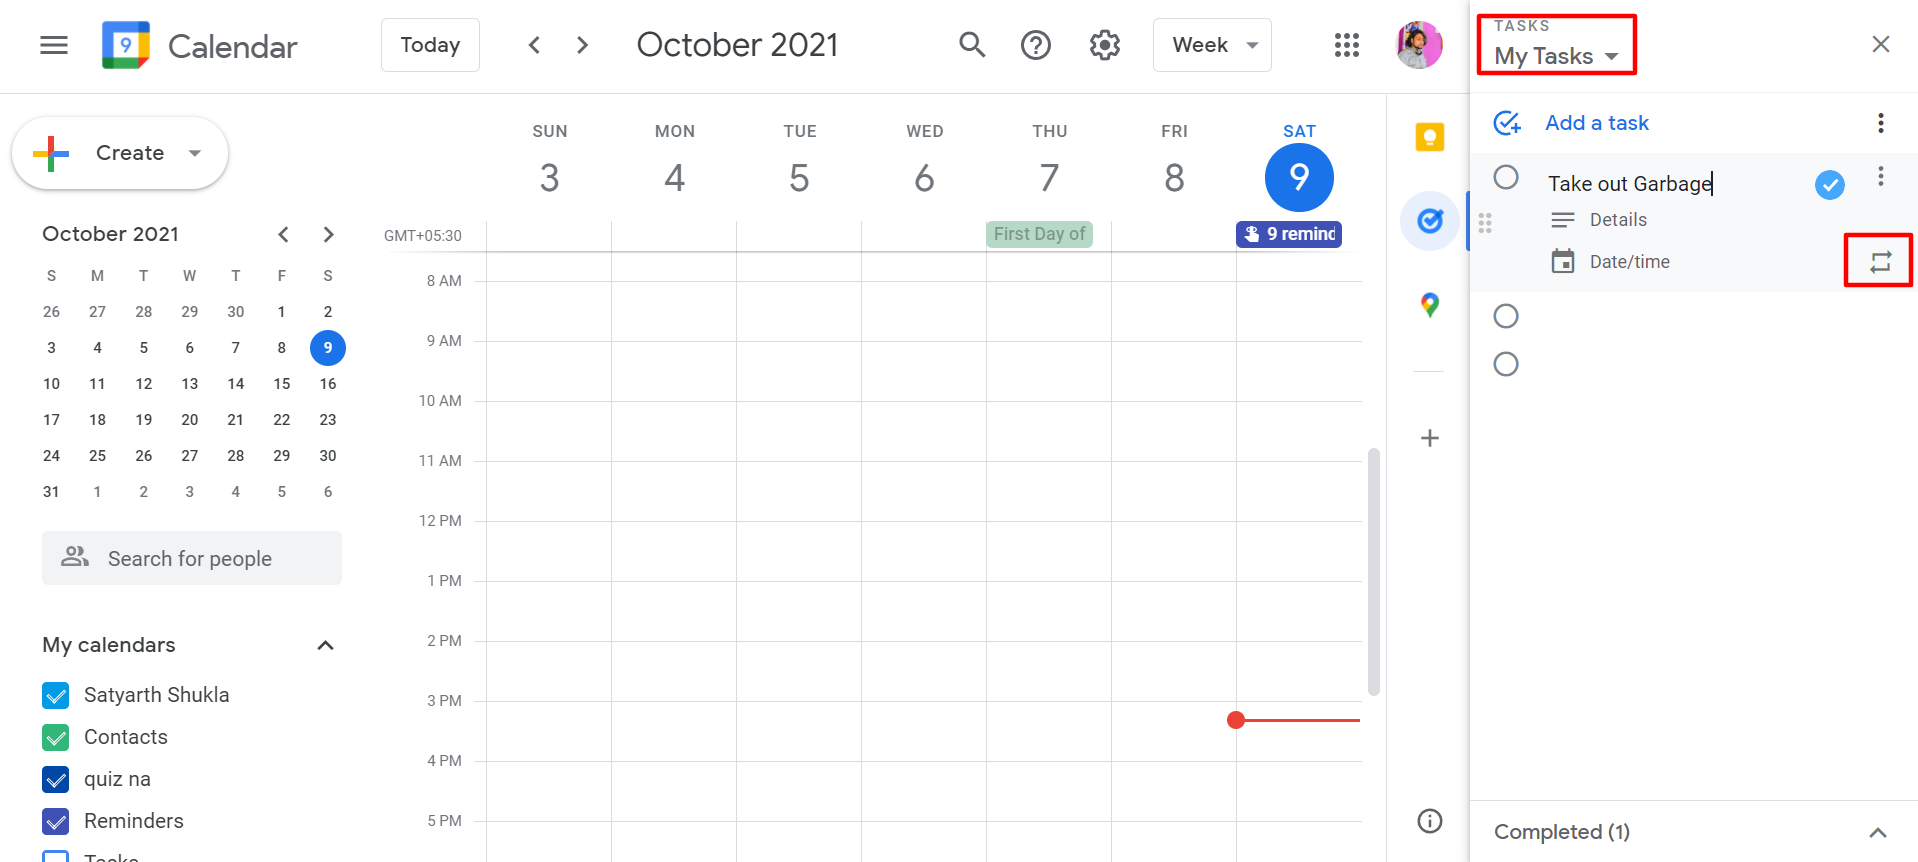 5 Tips to Use Google Tasks Effectively